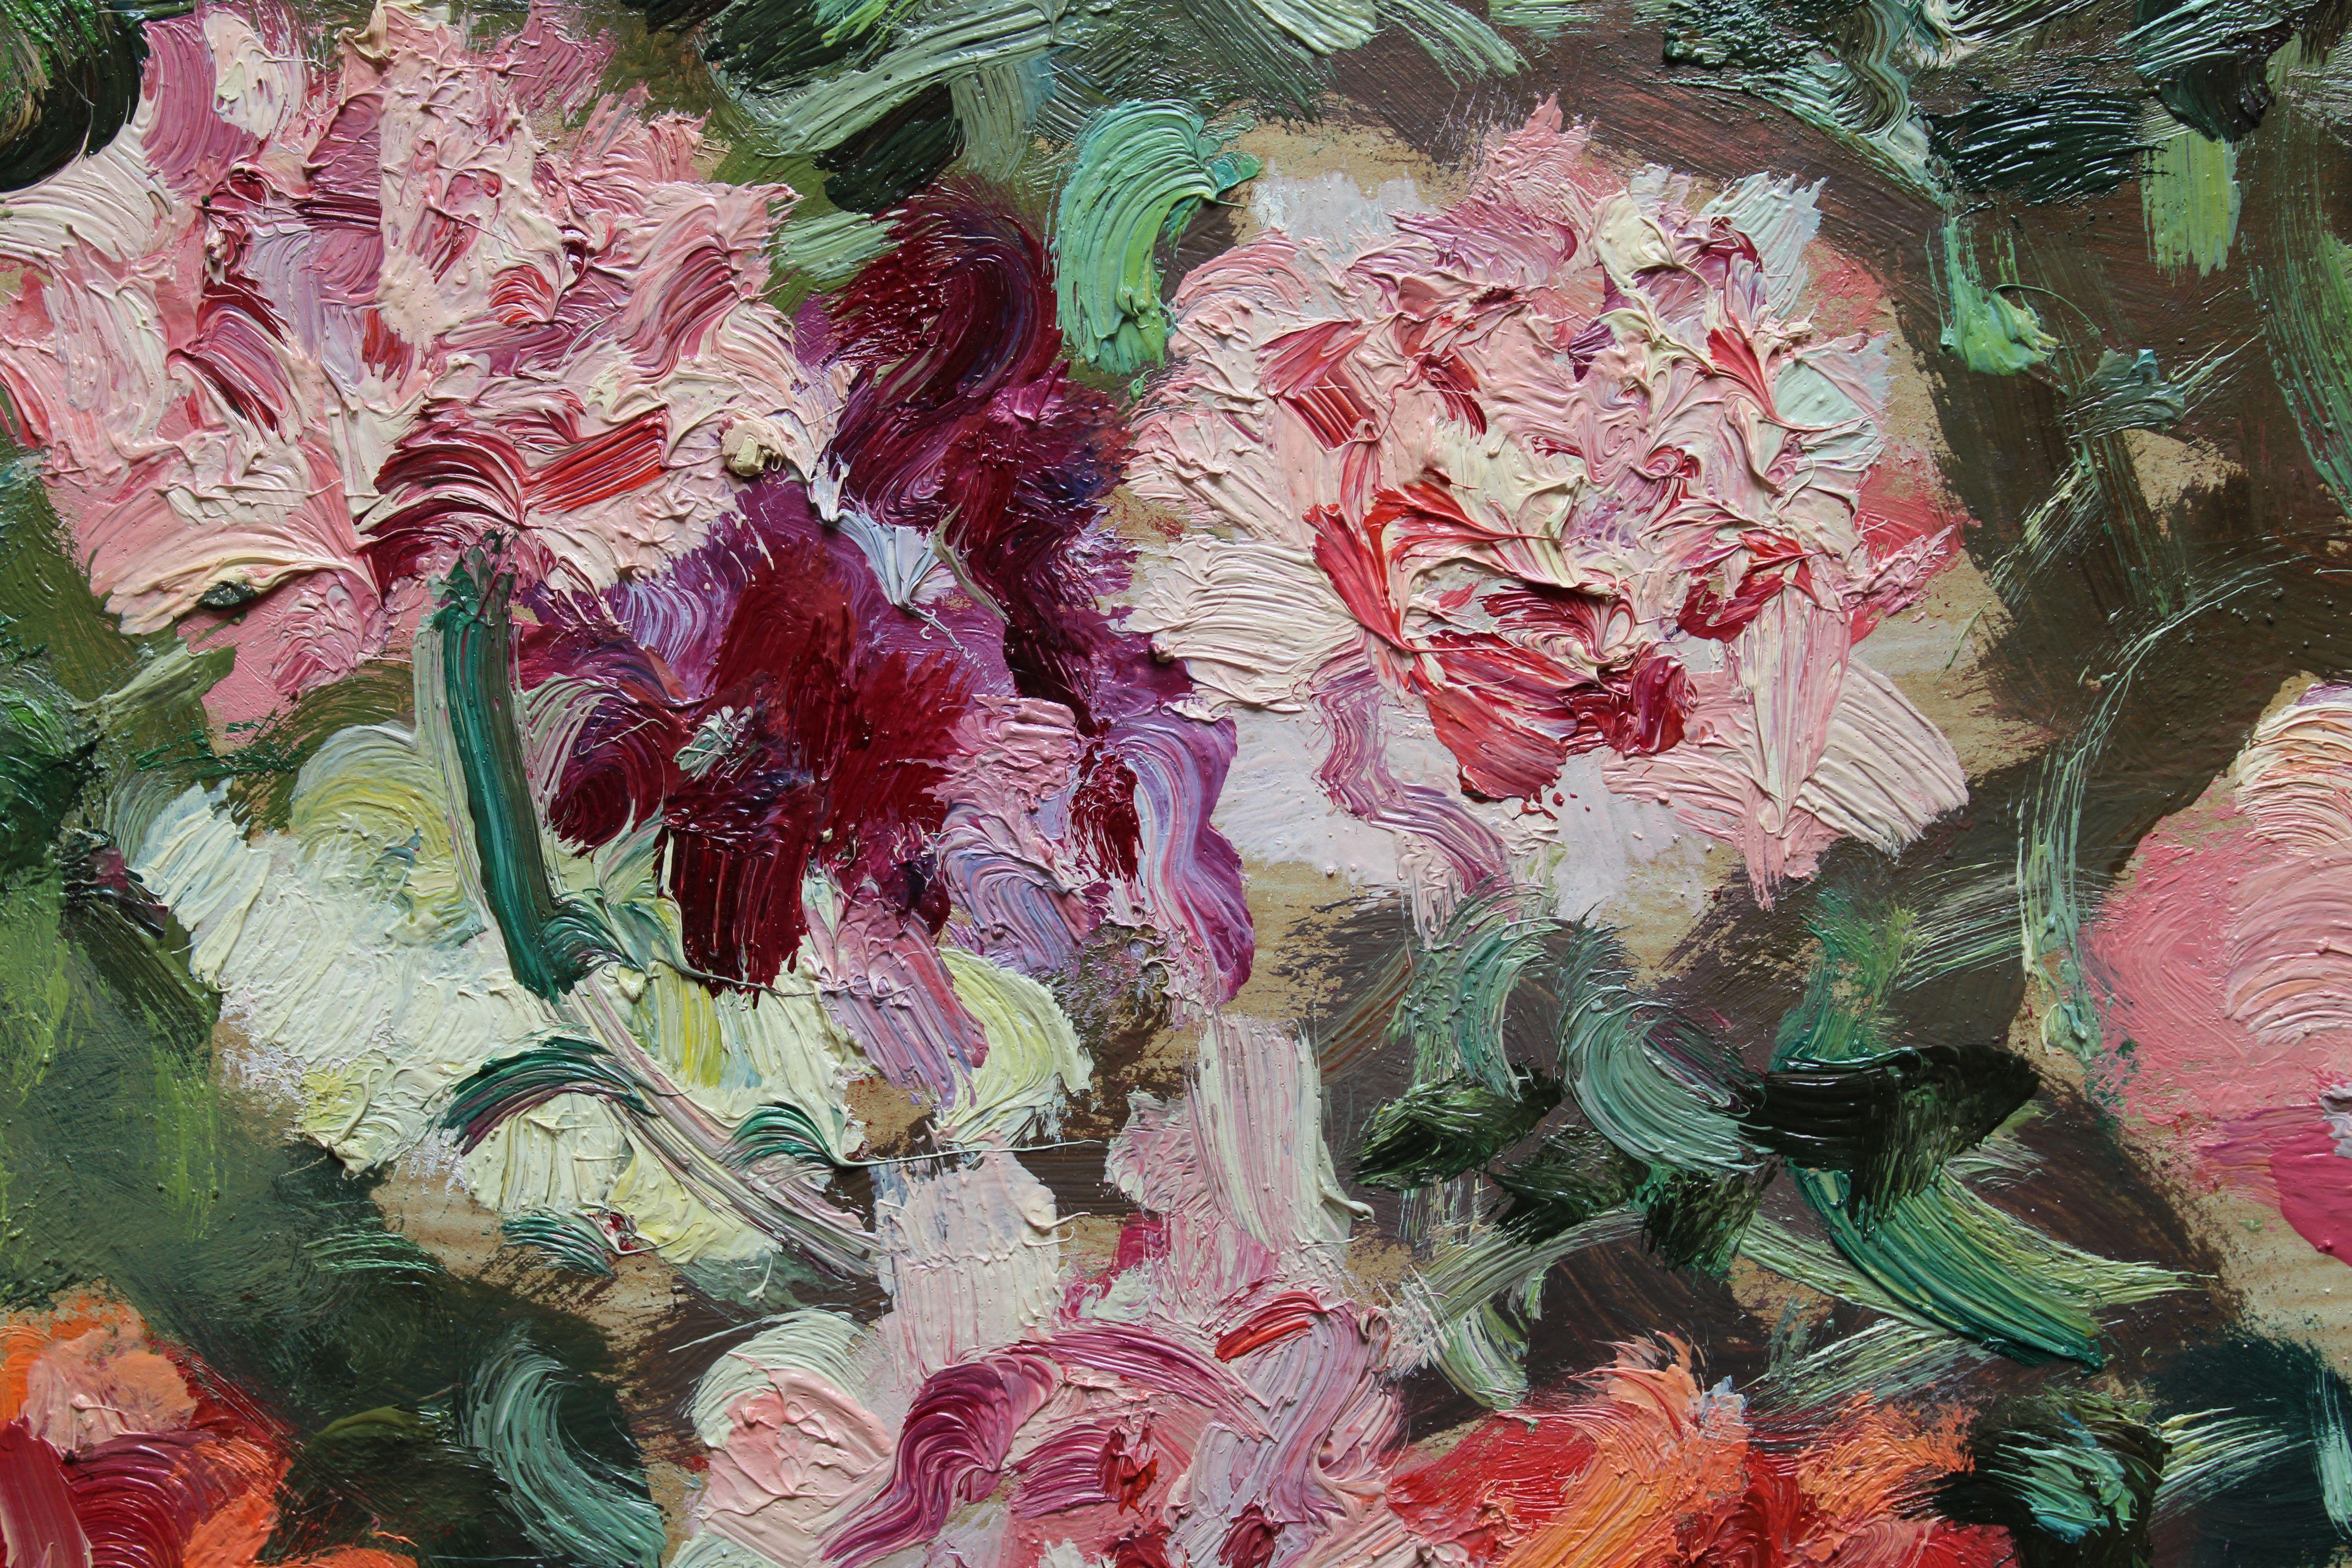 Carnations and roses. 1990, cardboard, oil, 92x67 cm - Impressionist Painting by Edgars Vinters